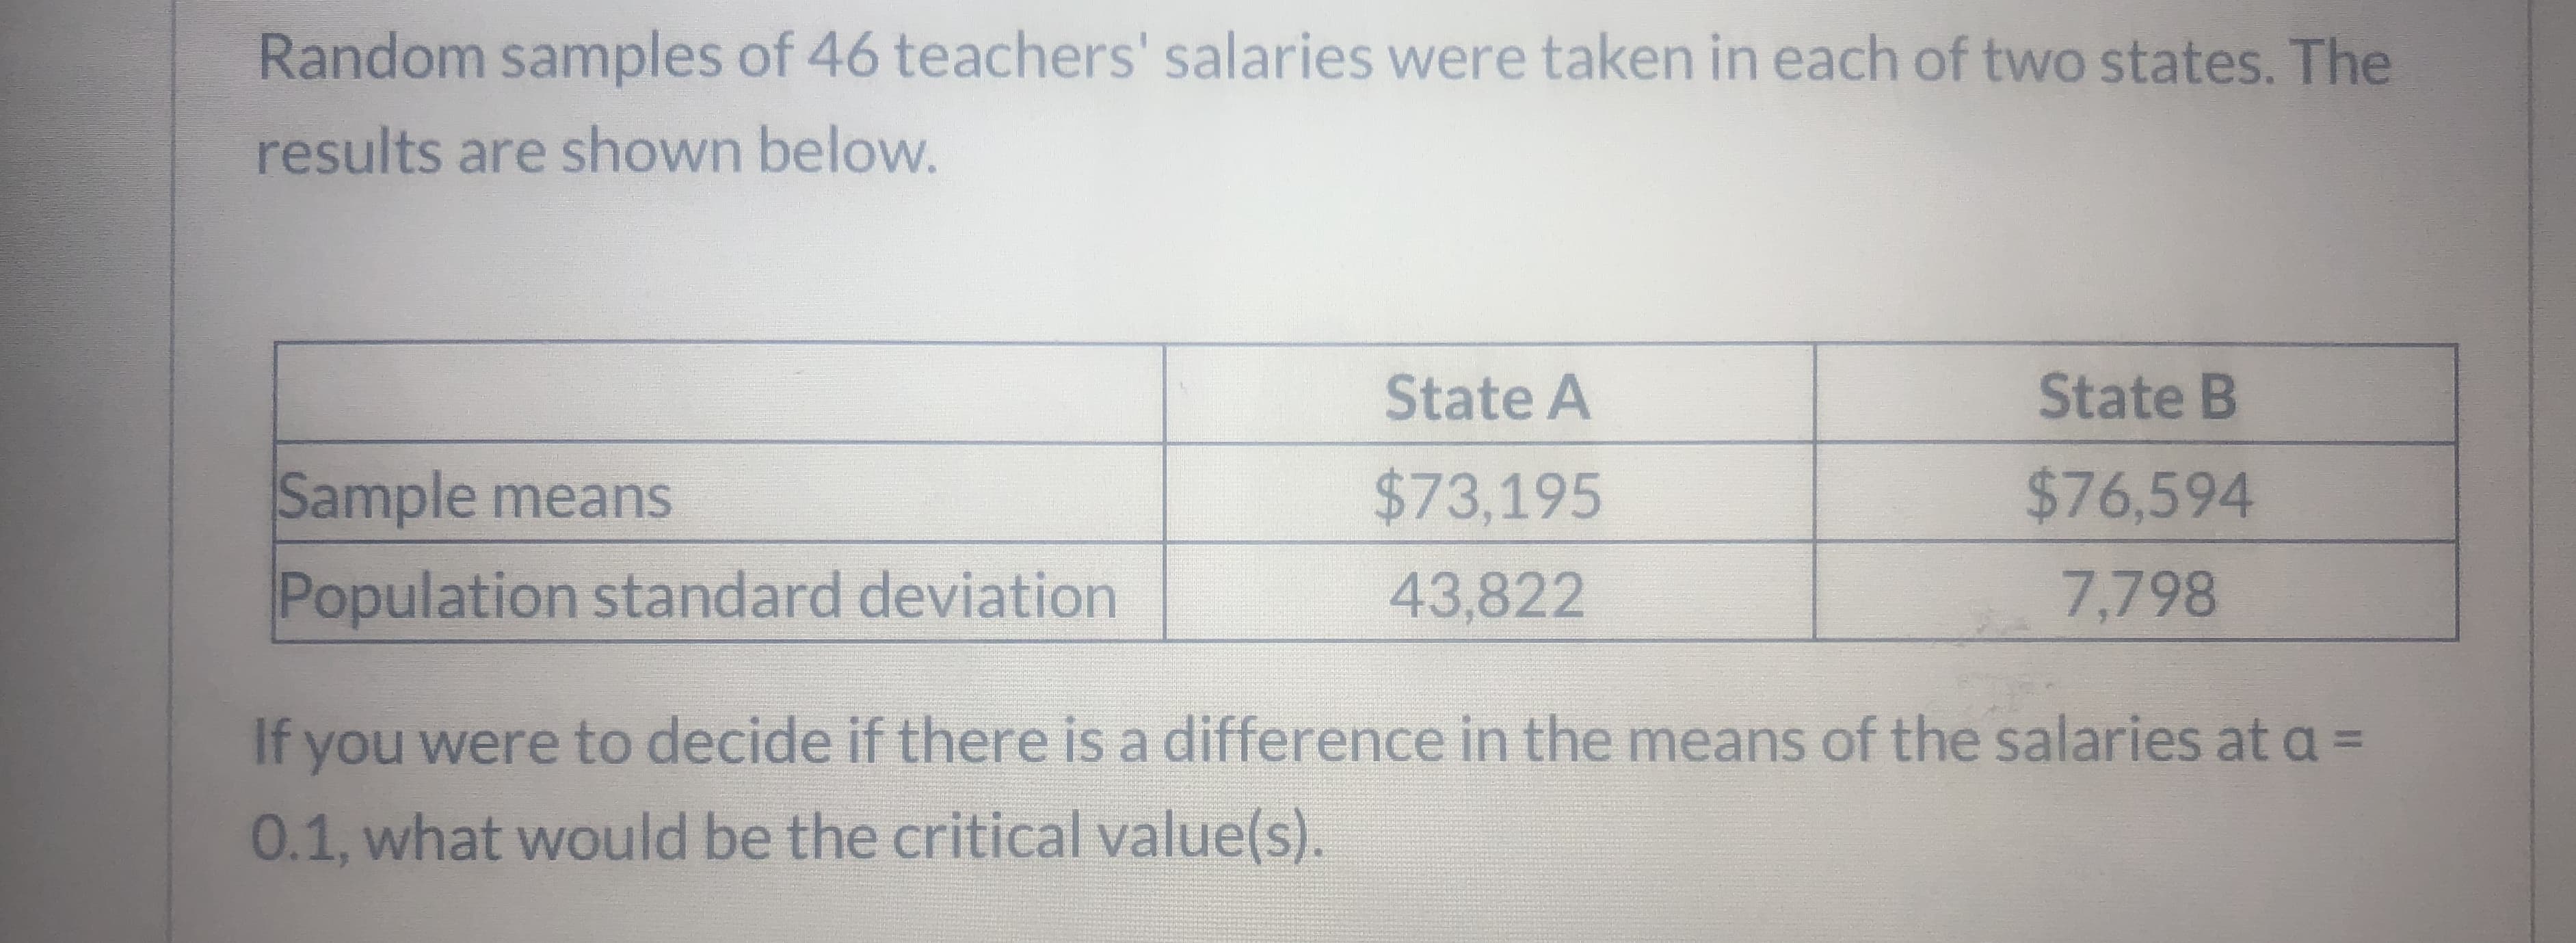 Random samples of 46 teachers' salaries were taken in each of two states. The
results are shown below.
State A
State B
Sample means
$73,195
$76,594
Population standard deviation
43,822
7,798
If you were to decide if there is a difference in the means of the salaries at a =
0.1, what would be the critical value(s).
